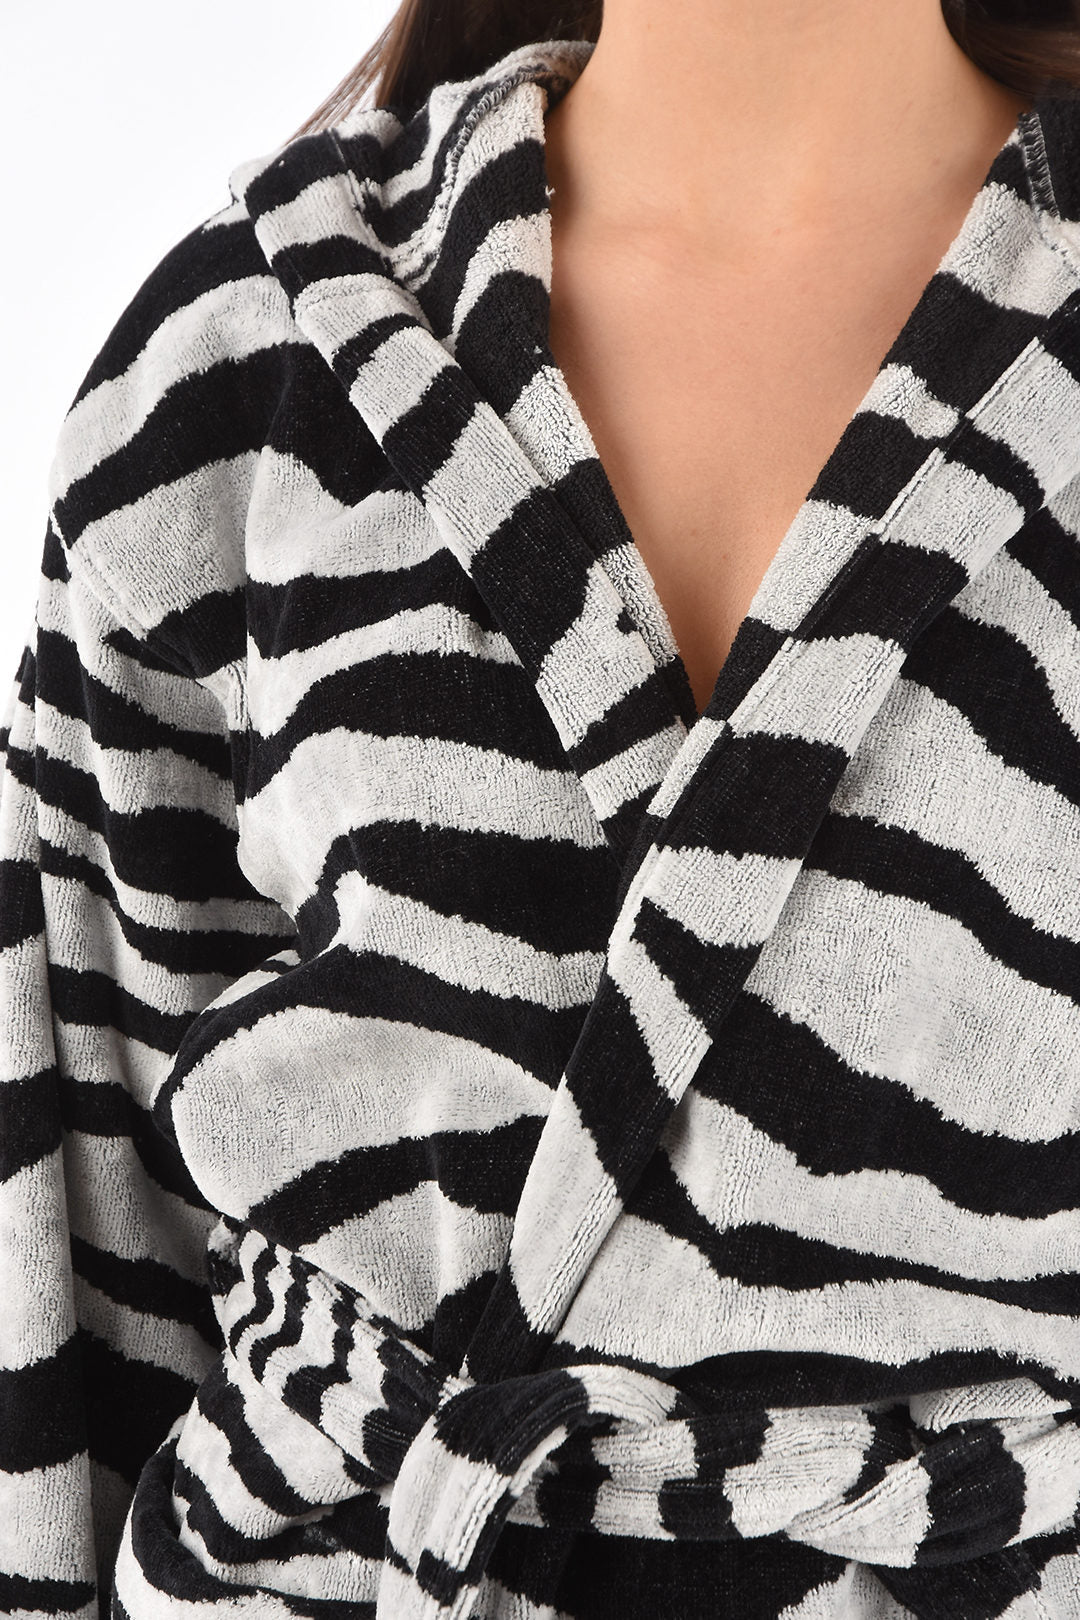 Home zebra patterned cotton bathrobe with black and white hood